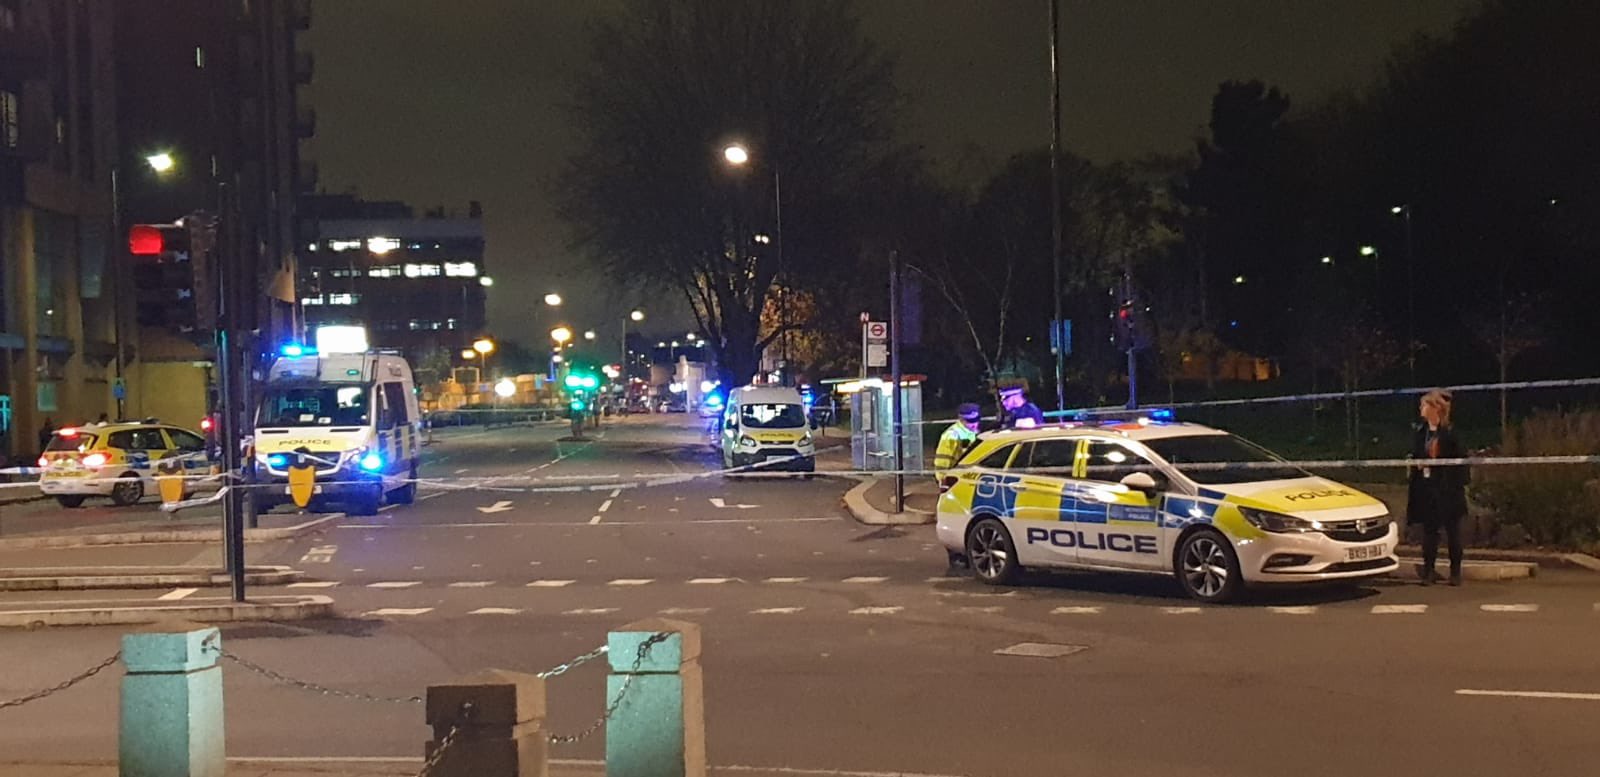 A police station in North London, UK, was hit by a car